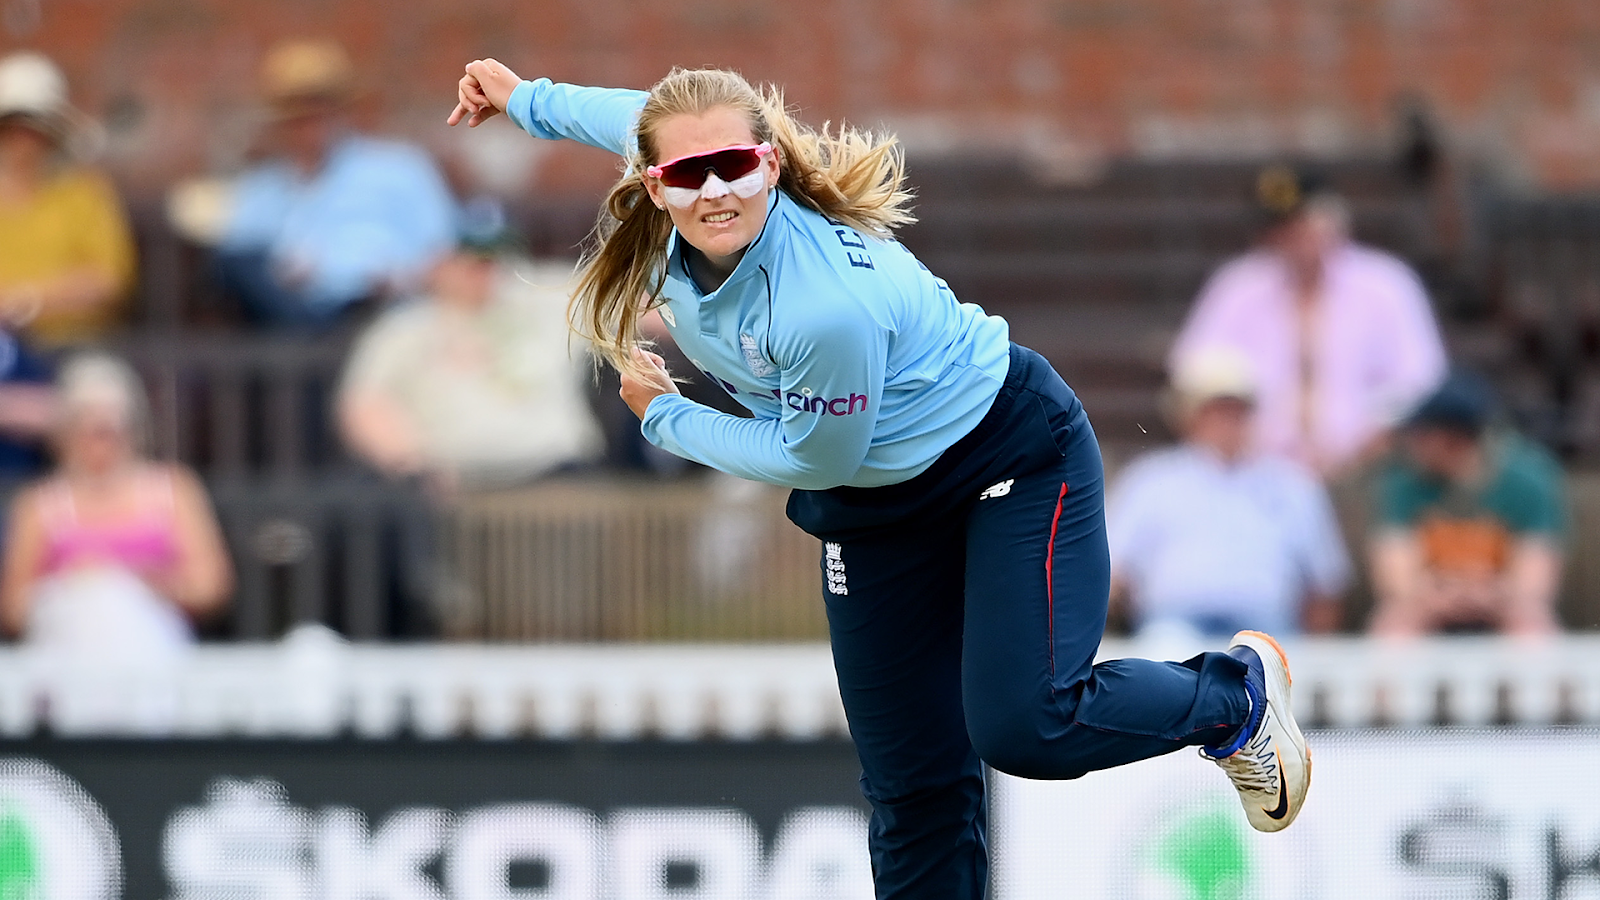 Sophie Ecclestone has scalped 20 wickets in the ongoing World Cup